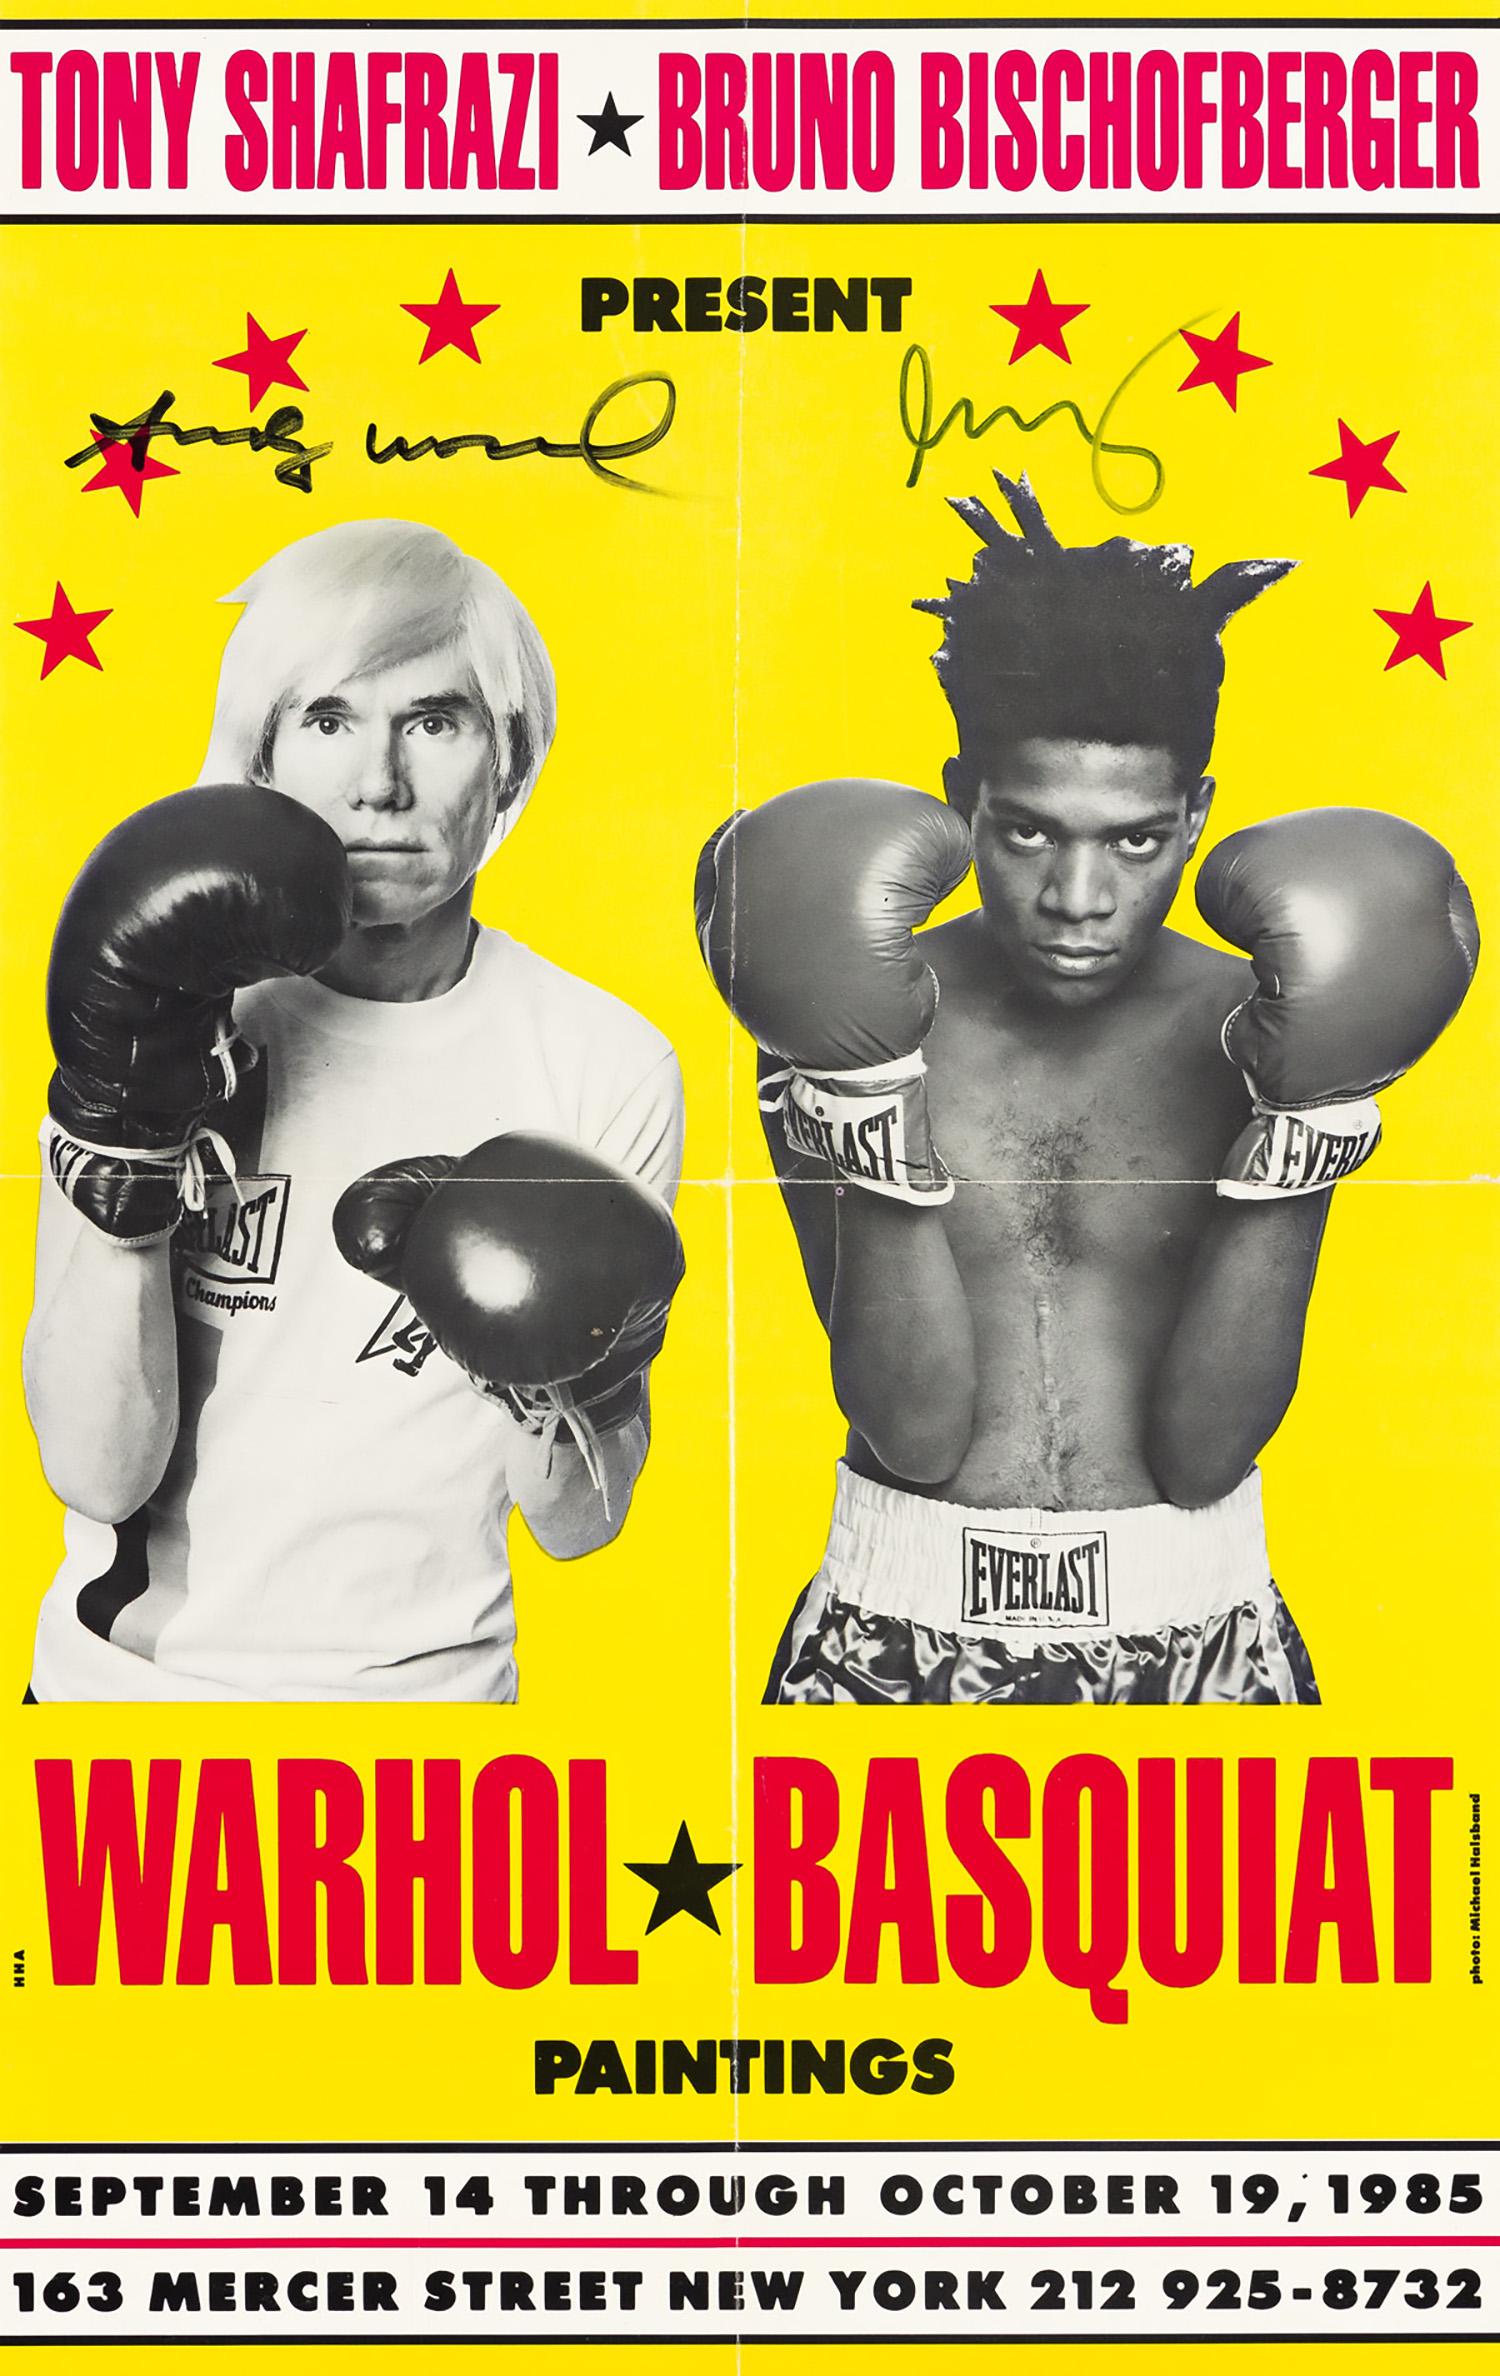 Signed Warhol Basquiat Boxing Poster 1985 (Warhol Basquiat collaborations) - Print by Michael Halsband